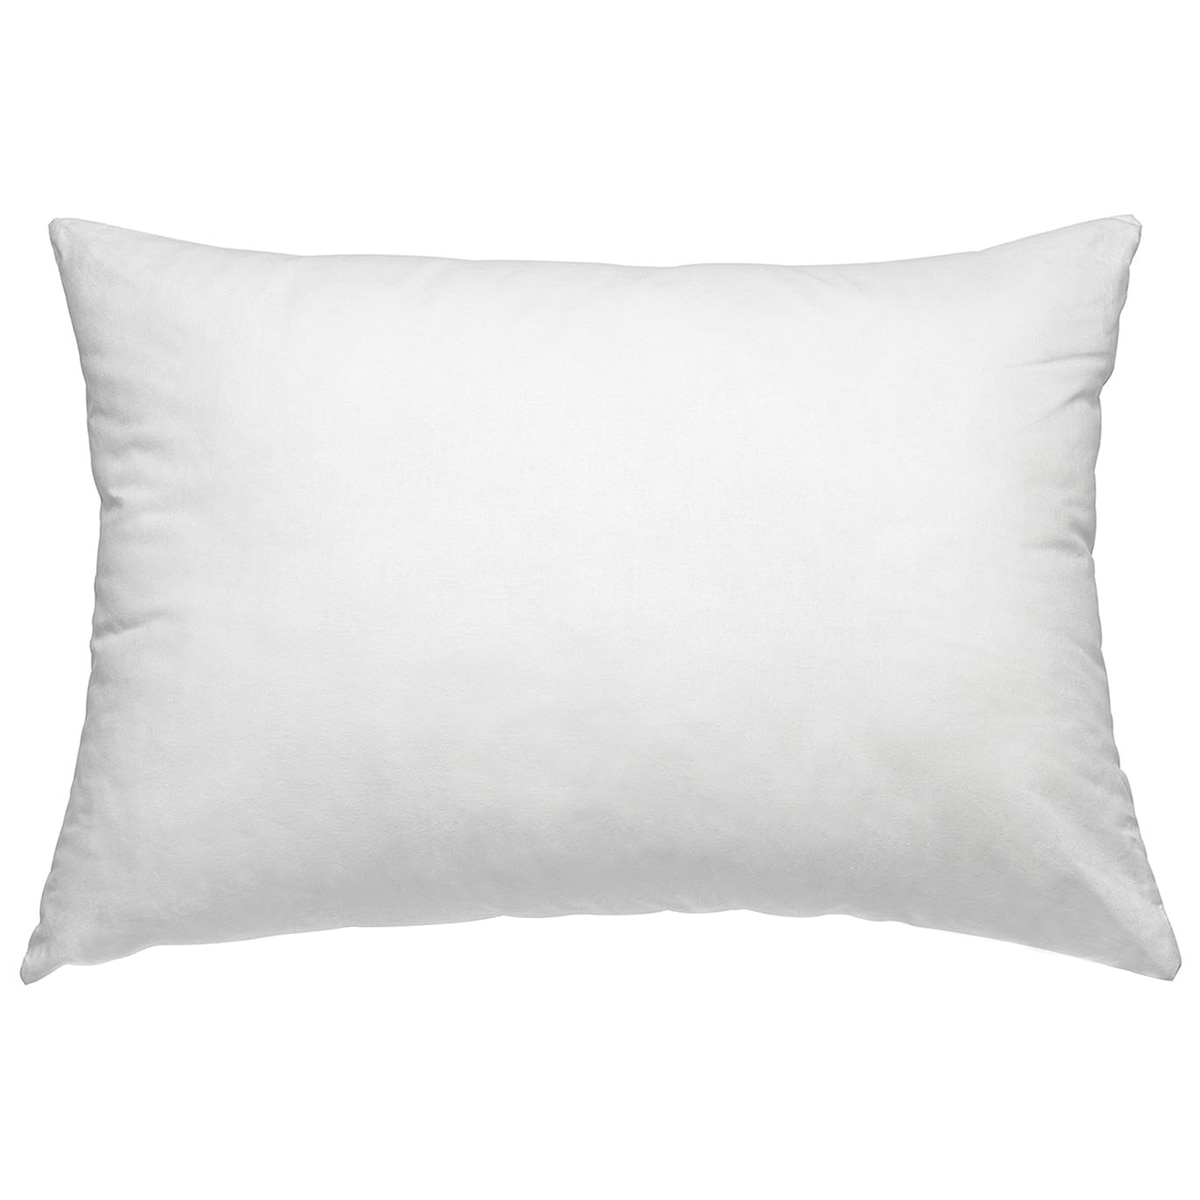 Bdirect Royal Comfort ‐ Duck Feather and Down Pillows (Twin Pack)